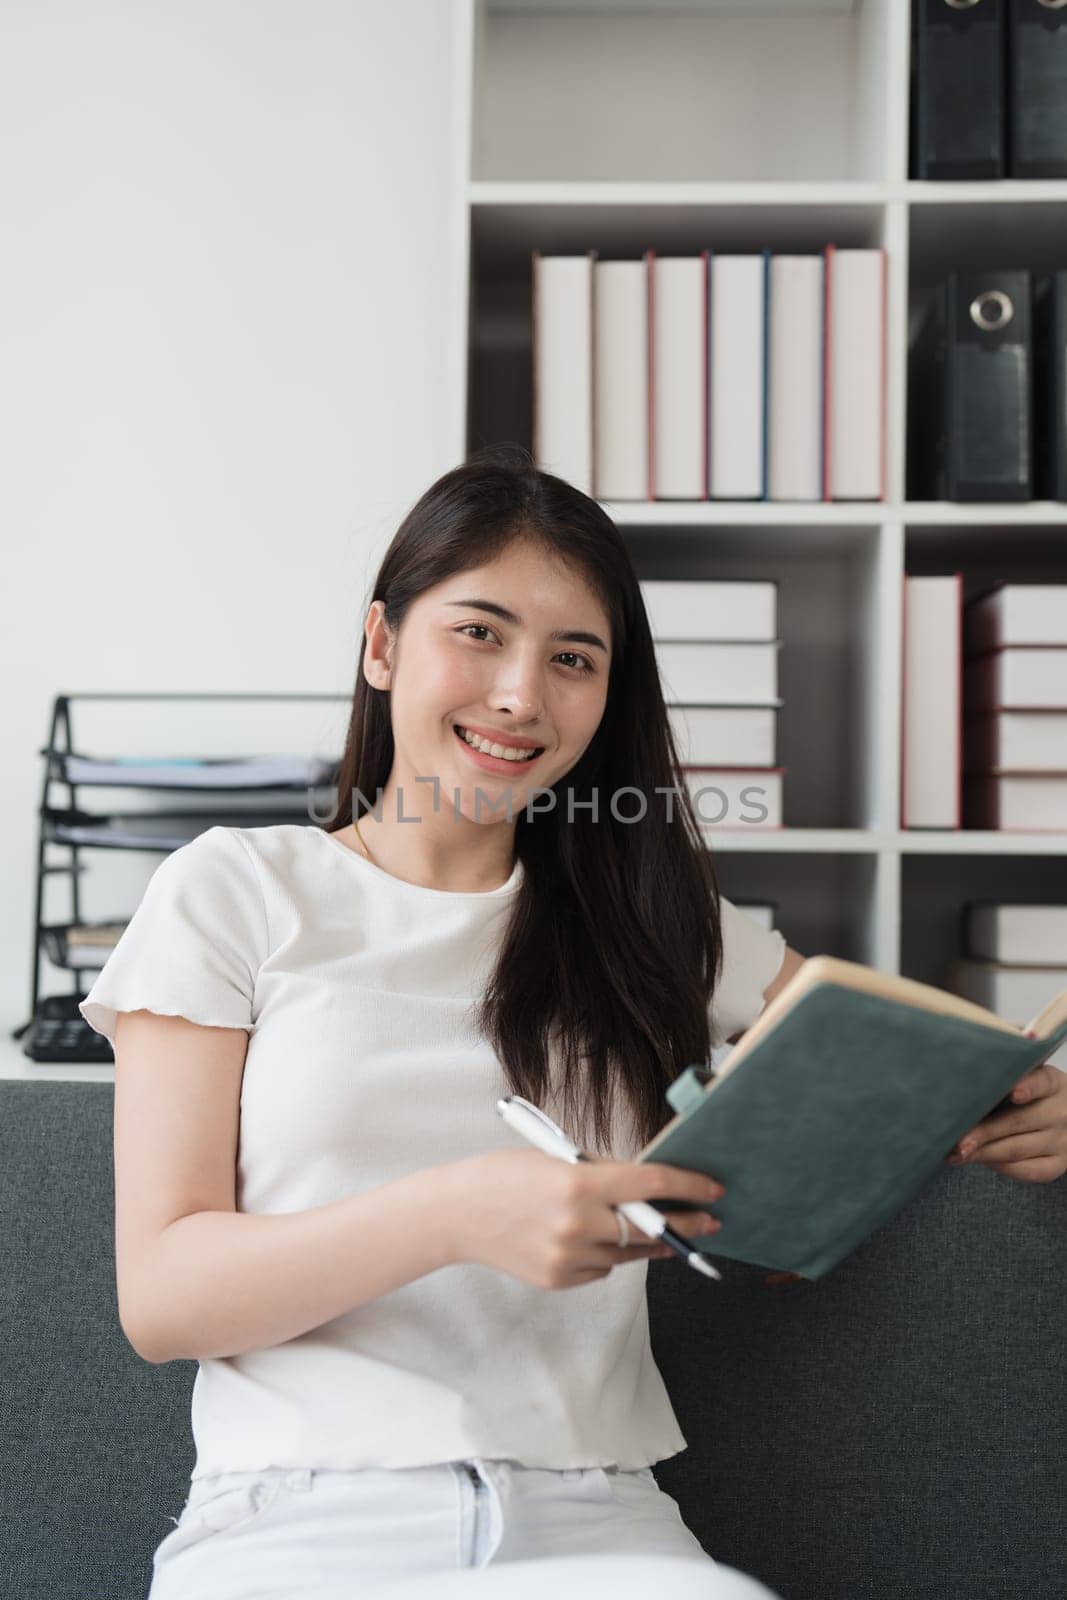 Attractive Asian woman resting comfortable living room and reading book, Relax, Sofa, Lifestyle.